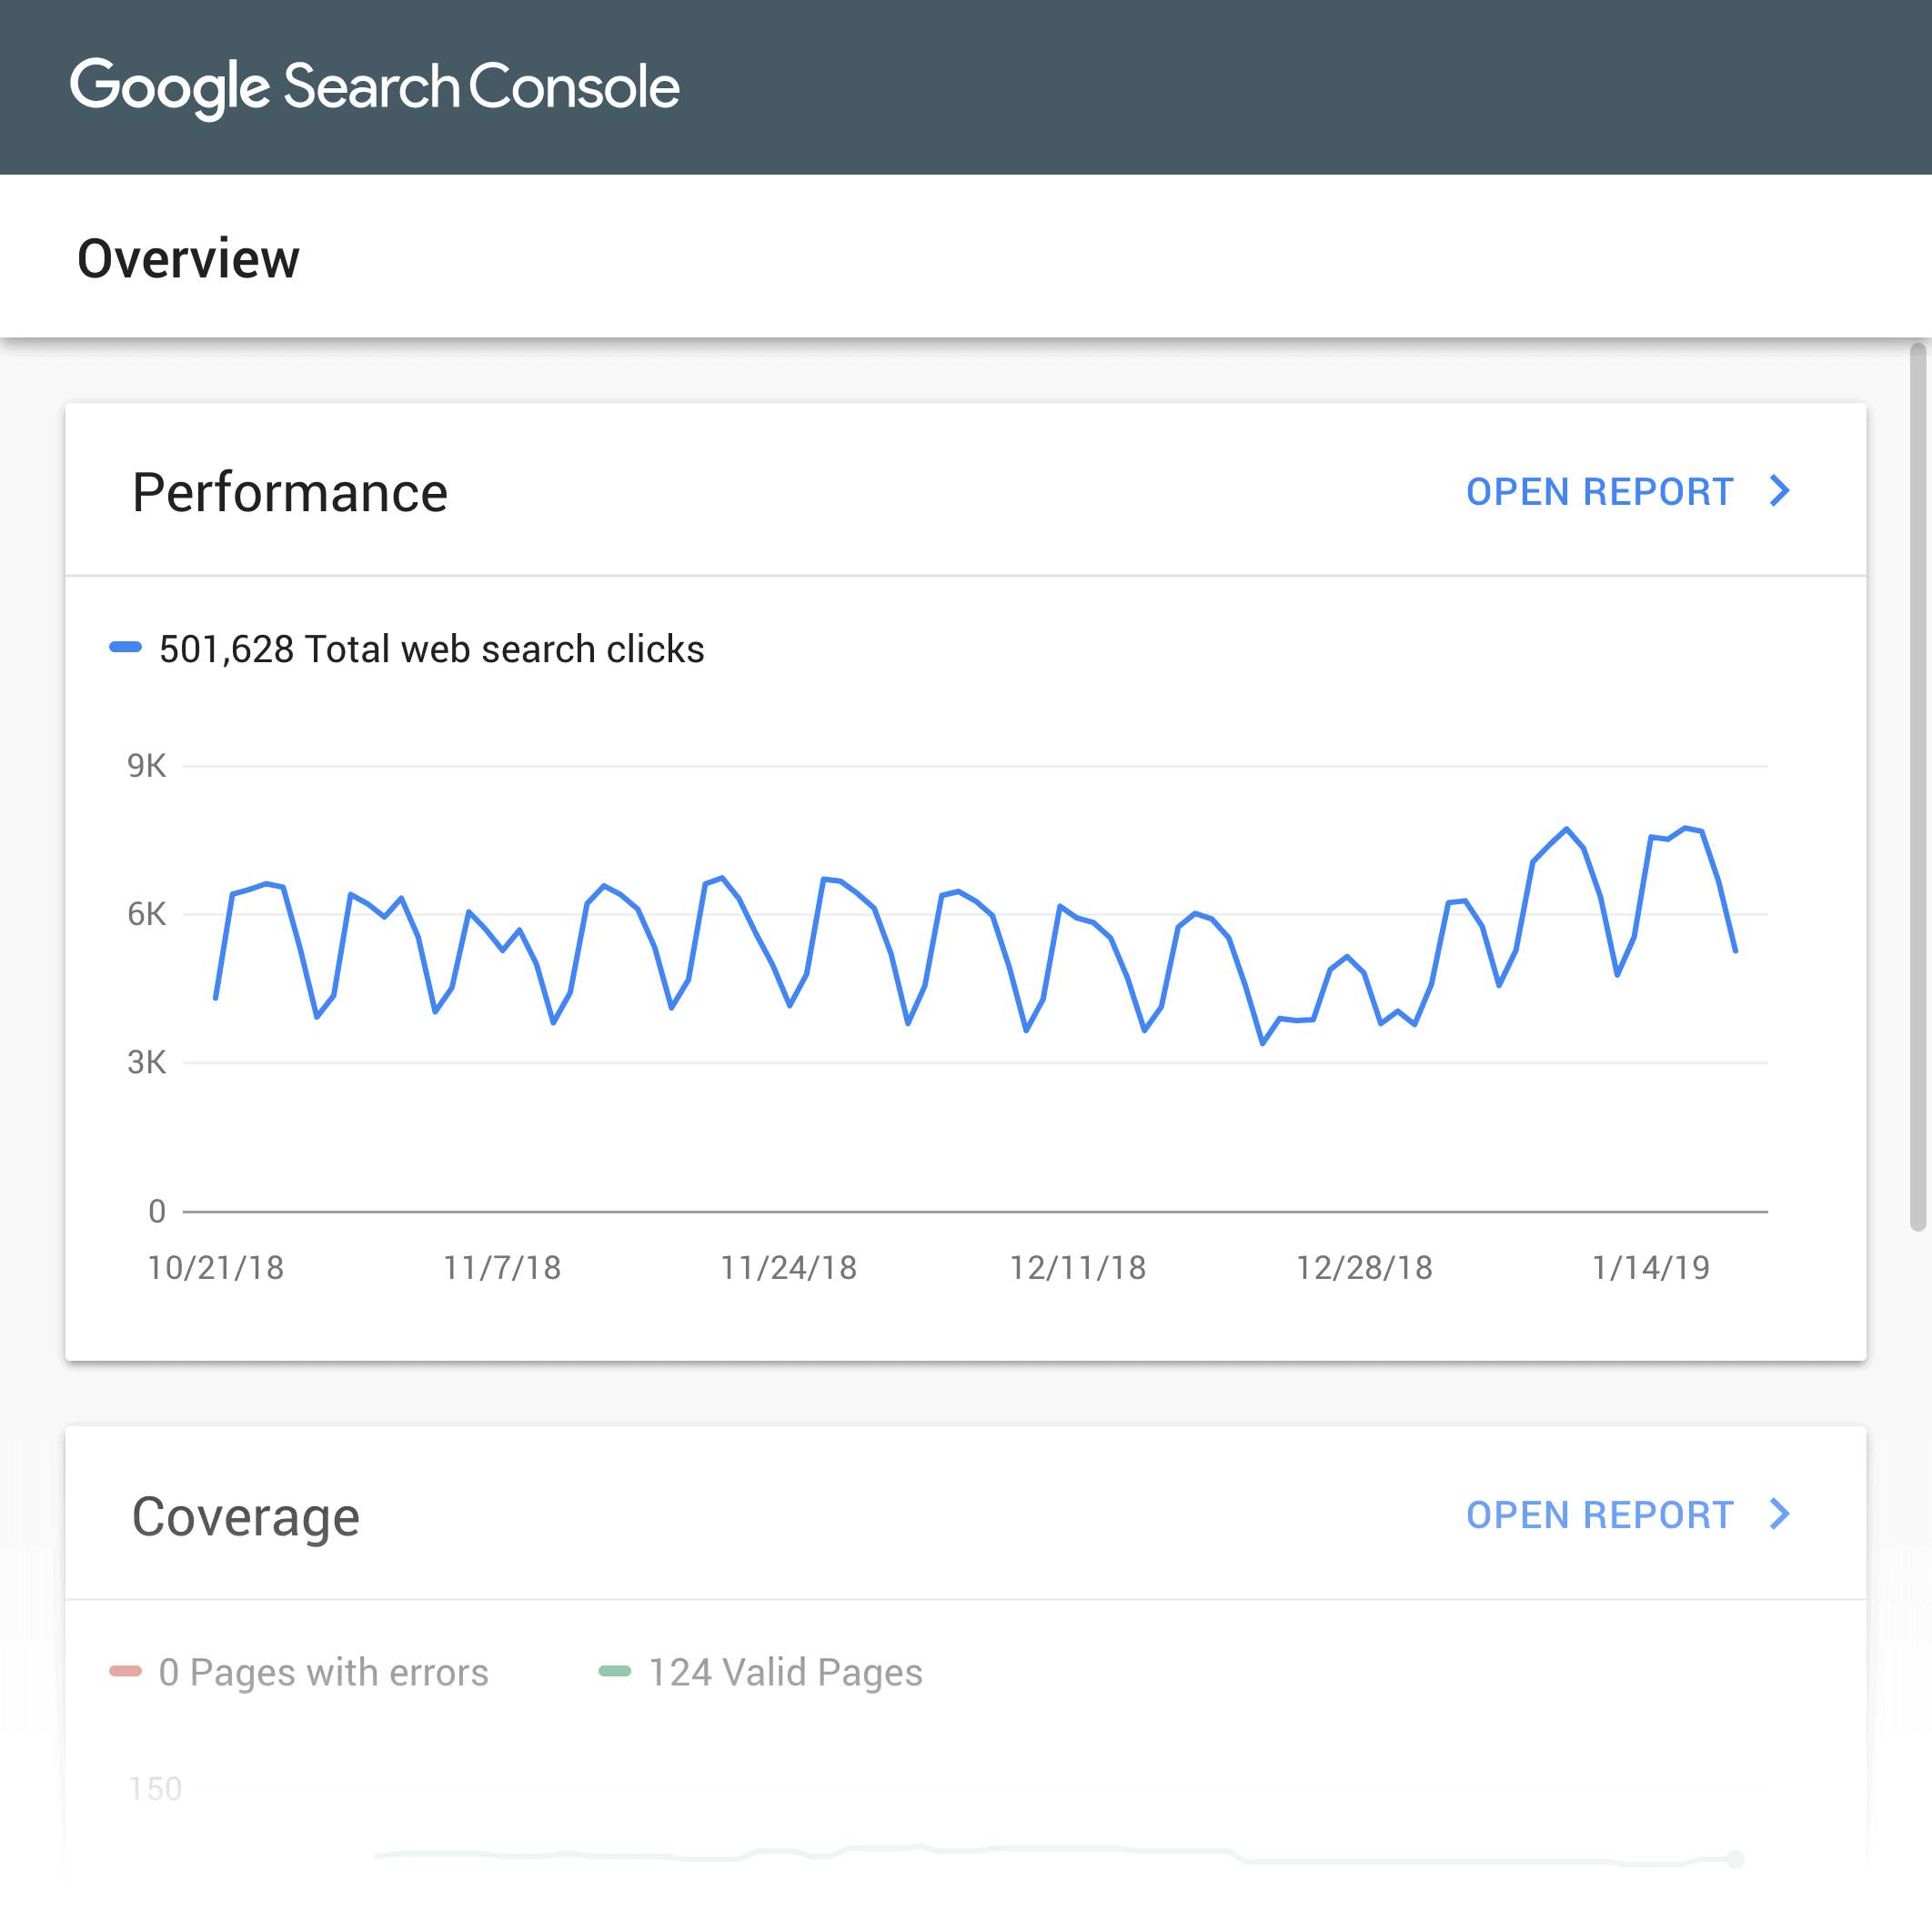 Google Search Console overview